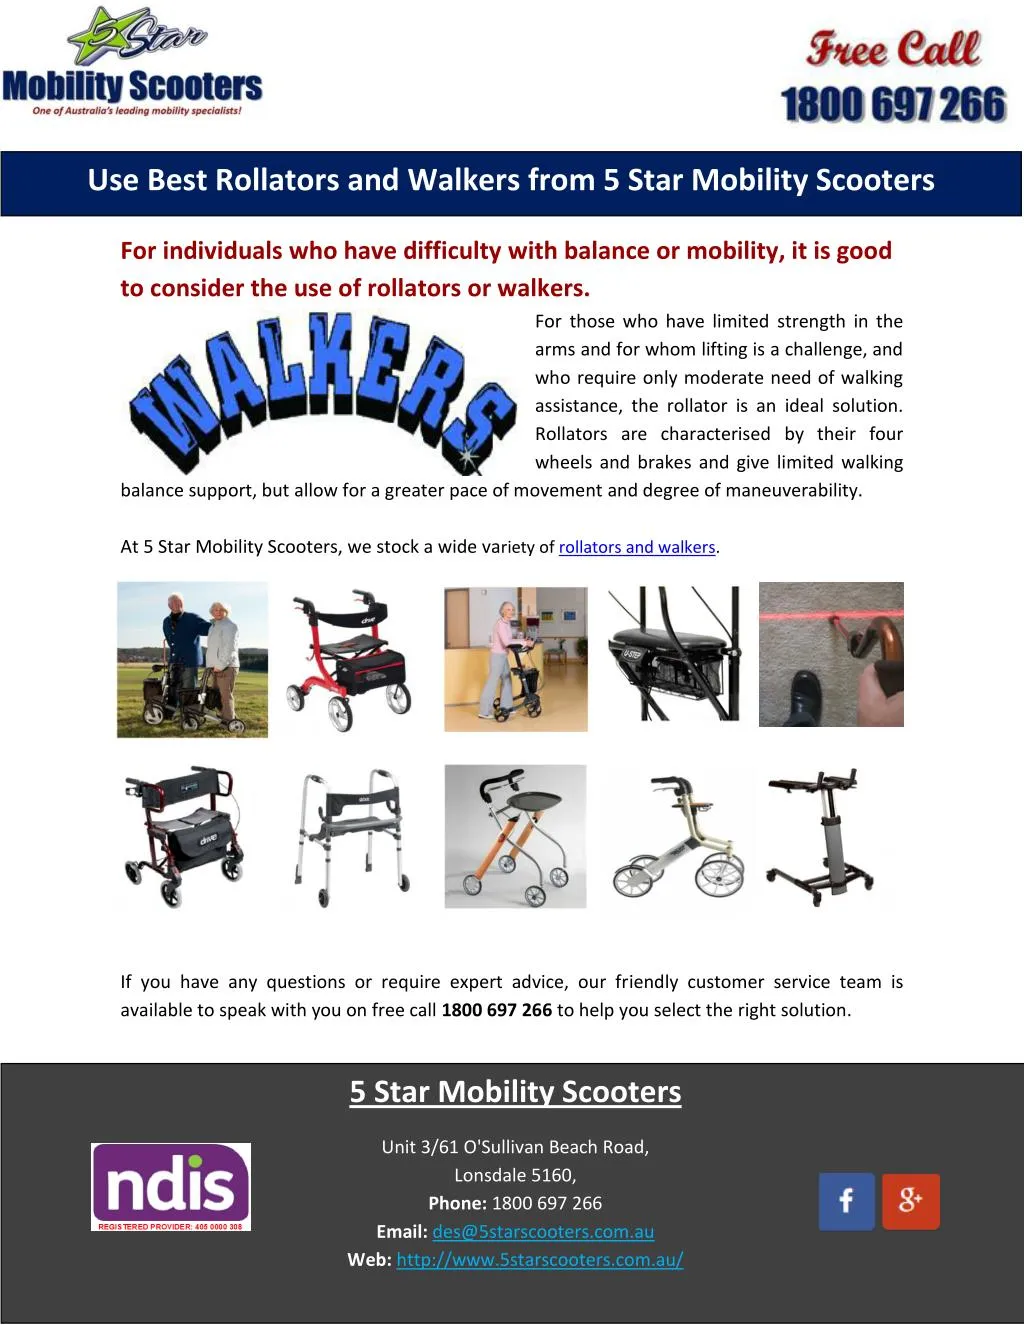 use best rollators and walkers from 5 star